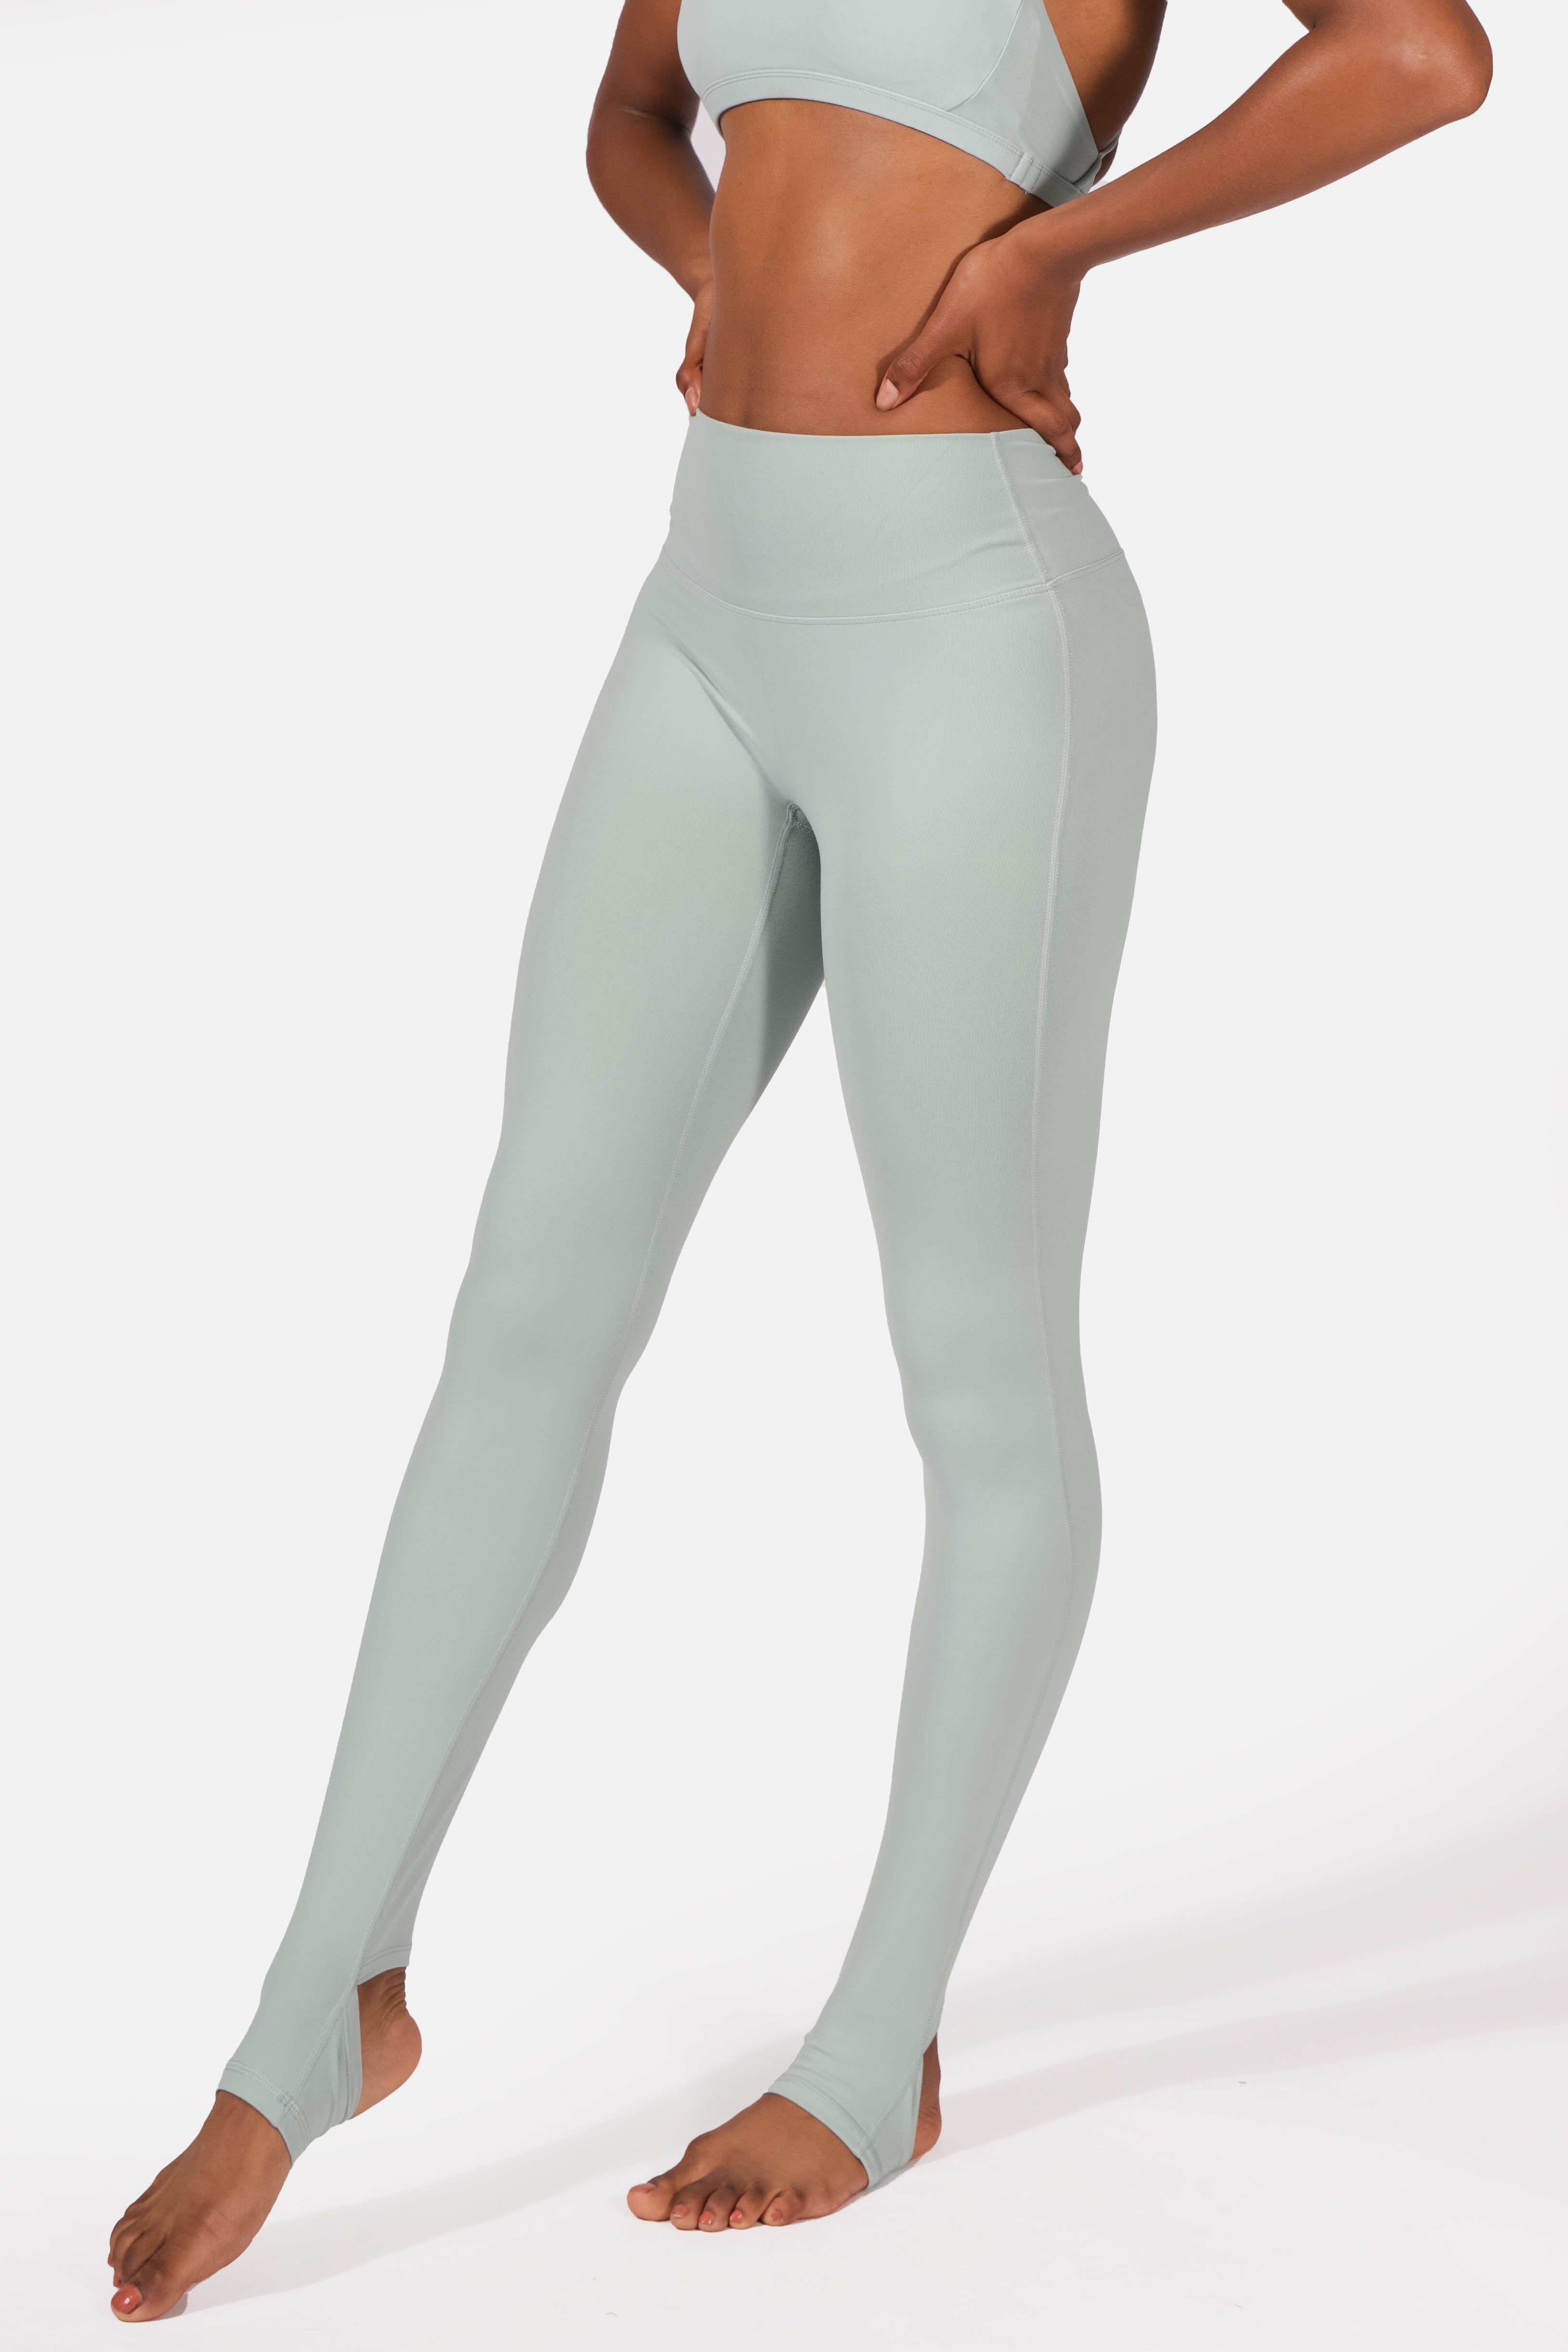 These compression leggings magically help prevent cellulite